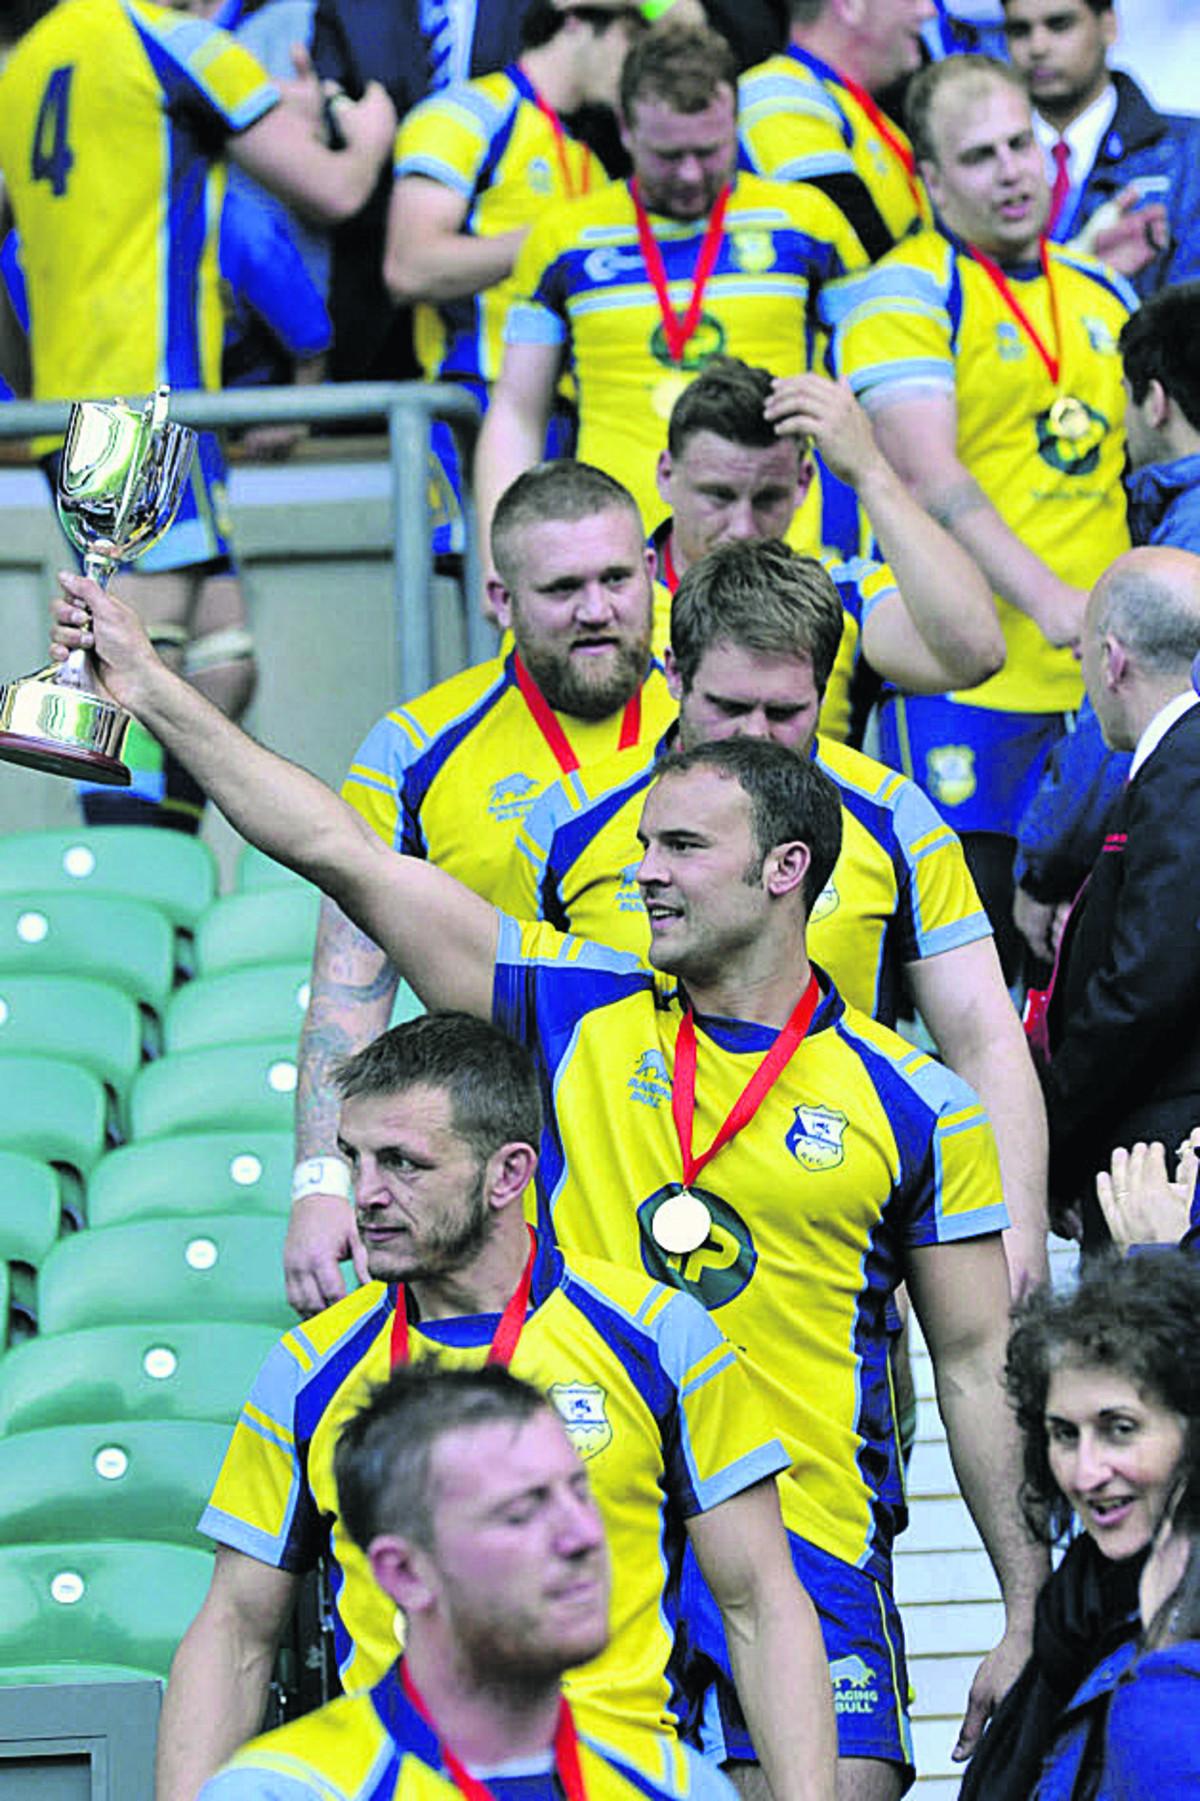 Trowbridge RFC players and fans celebrate victory in the RFU Intermediate Cup match at Twickenham over Leek yesterday.